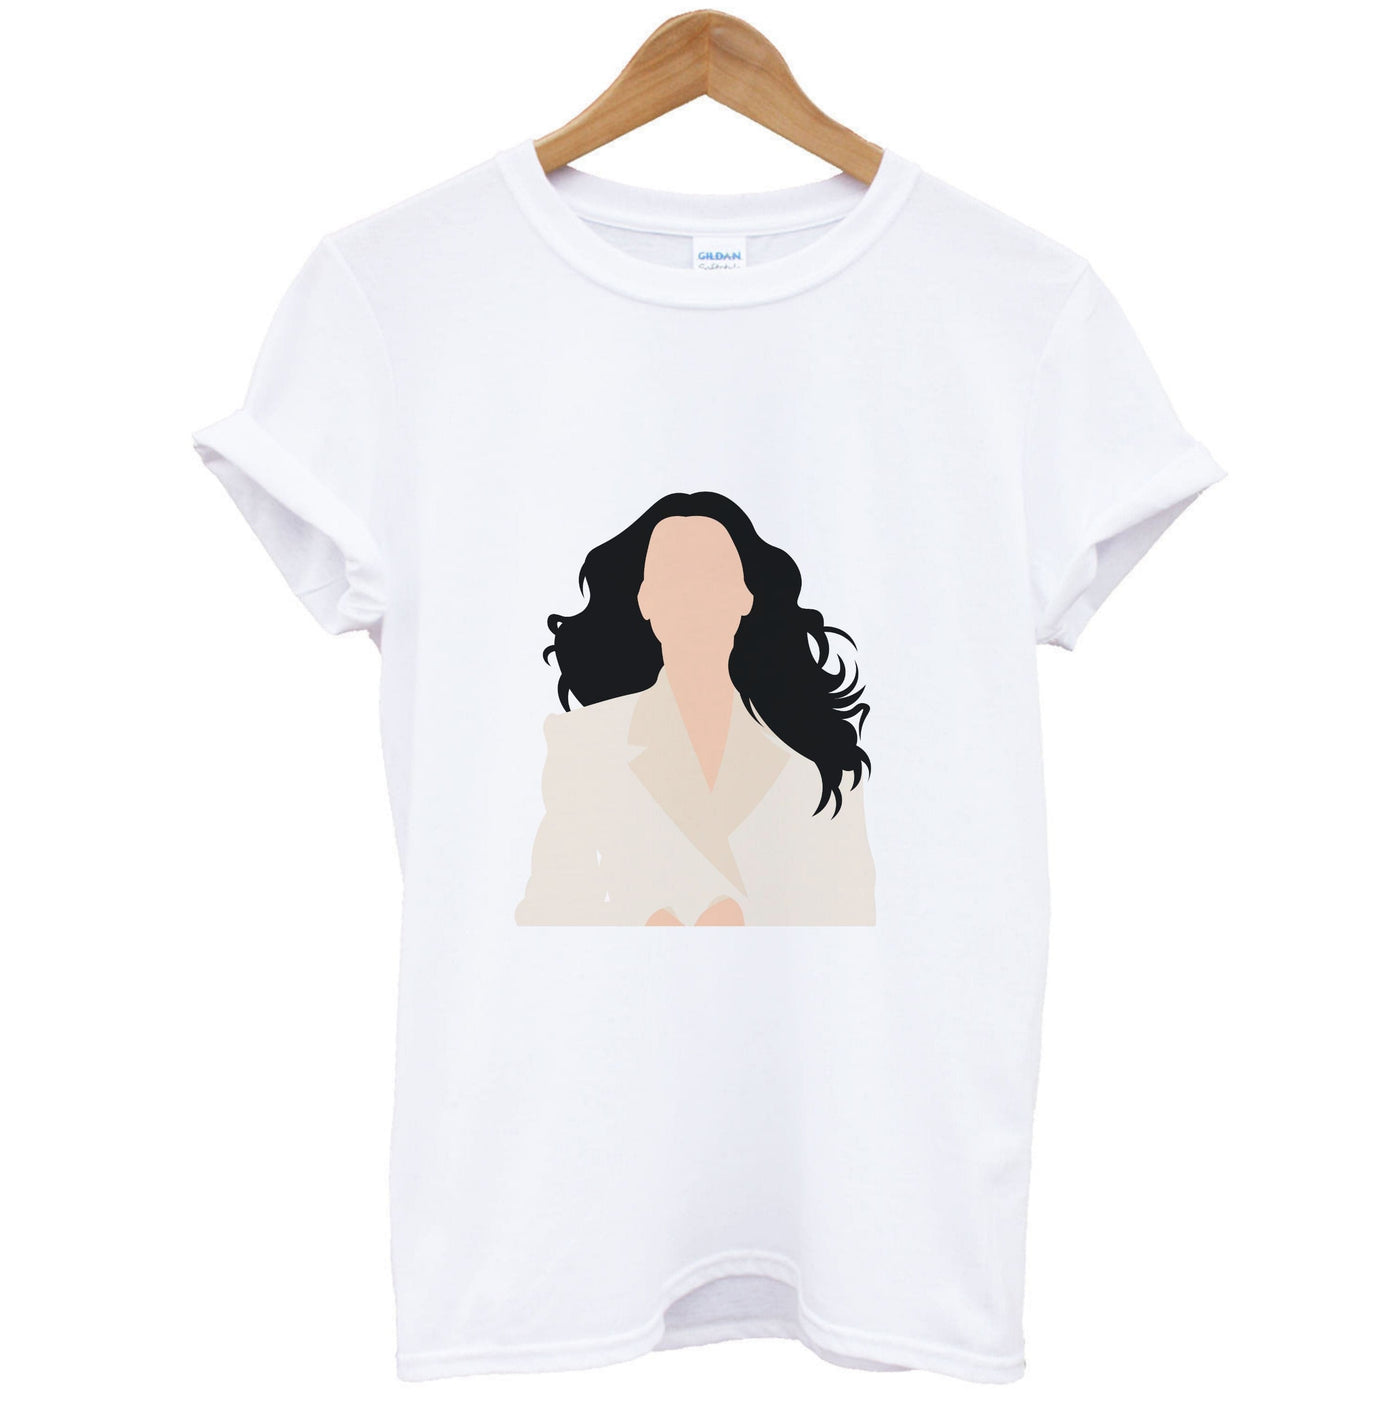 Her - Katy Perry T-Shirt